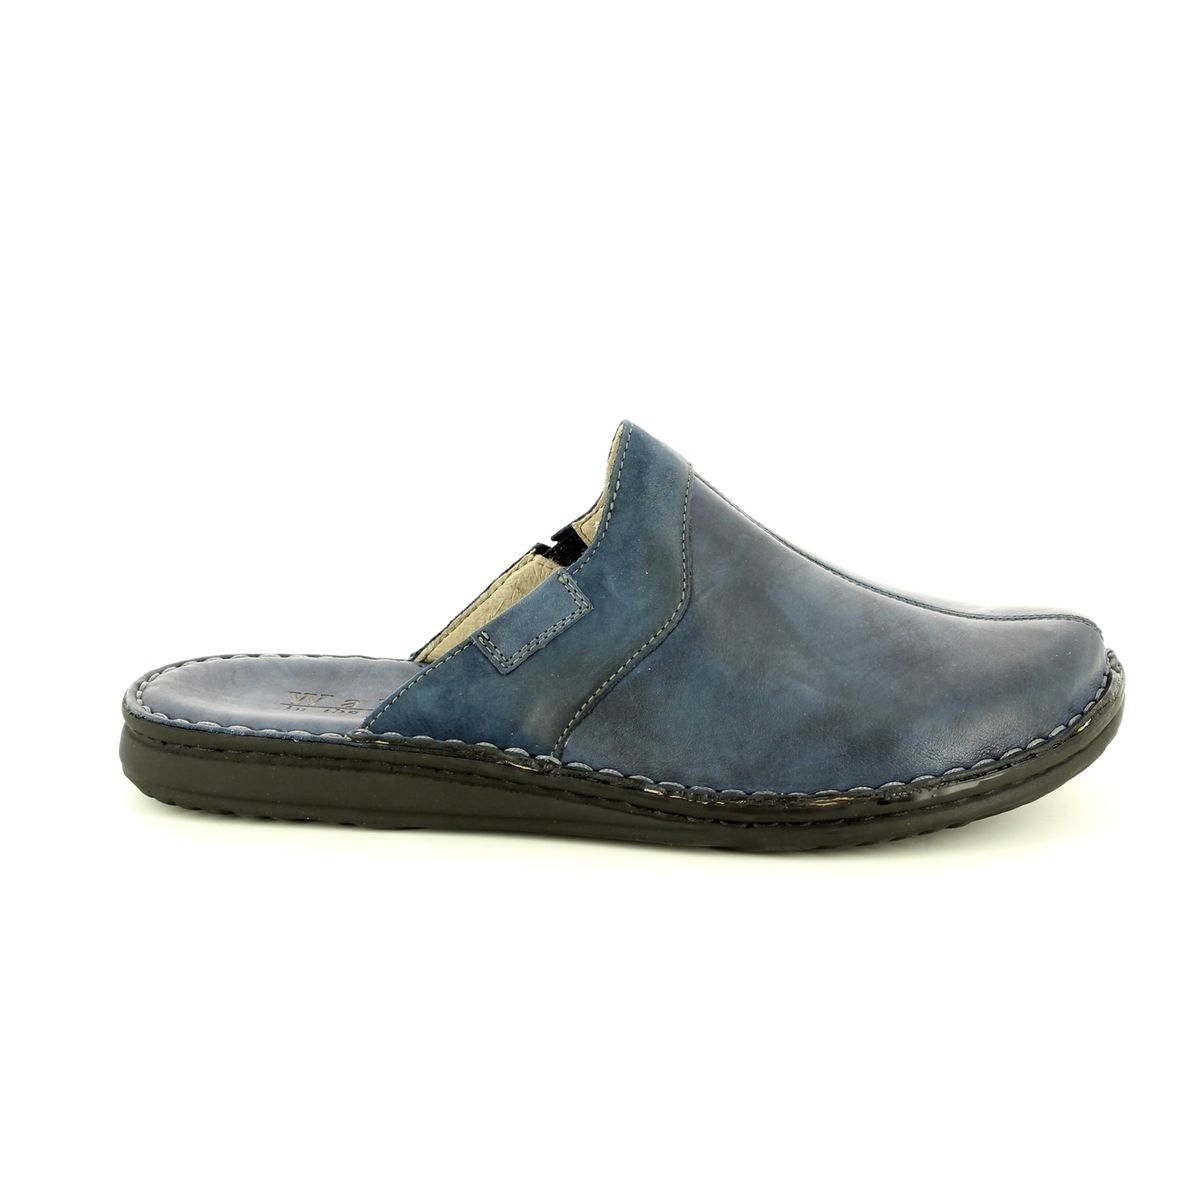 Walk in the City Leamu 2307-28800 Navy Leather Mule Slippers